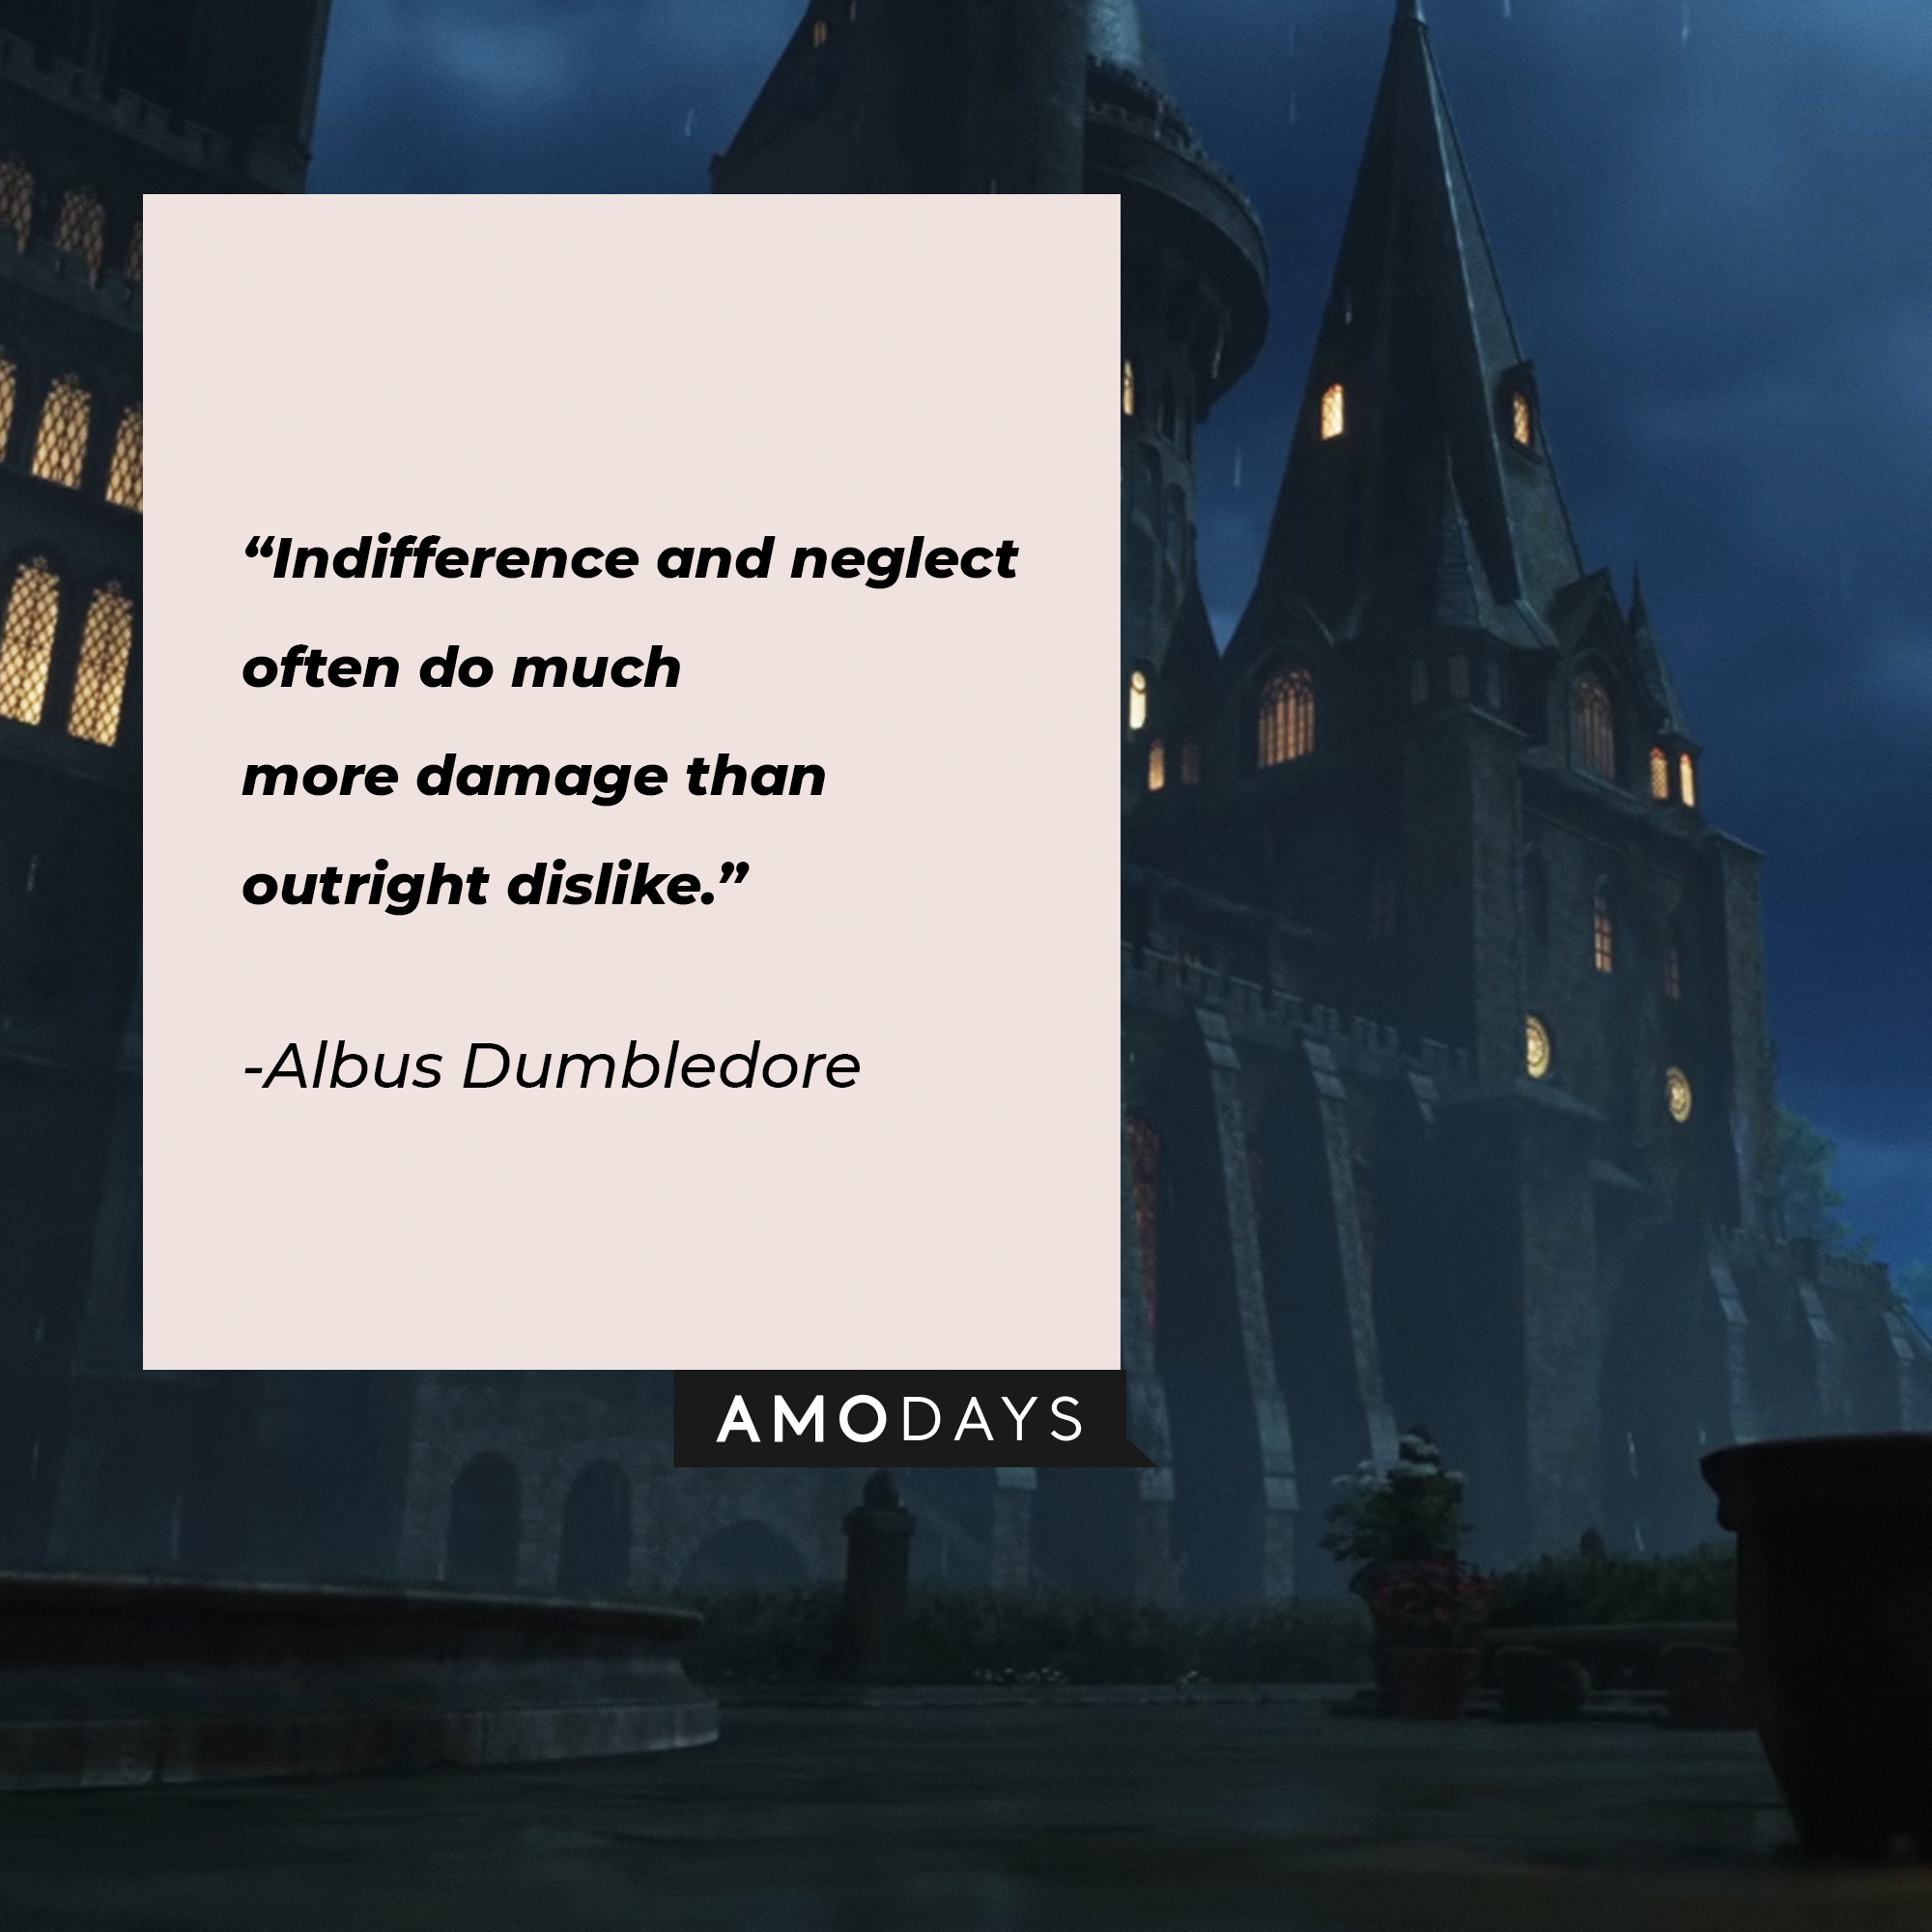 Albus Dumbledore's quote: "Indifference and neglect often do much more damage than outright dislike." | Source: Youtube.com/HogwartsLegacy